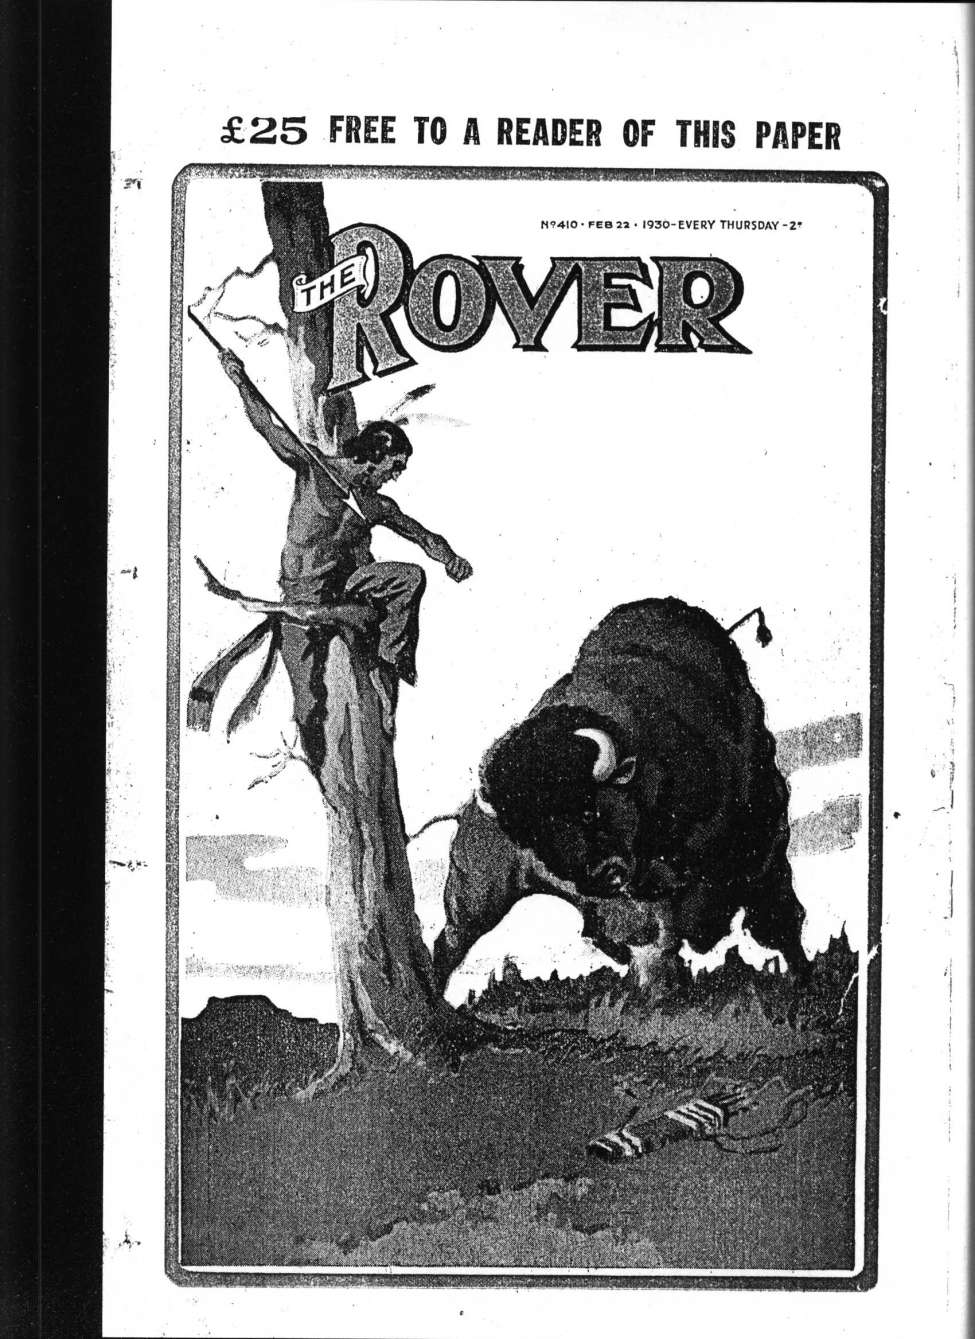 Book Cover For The Rover 410